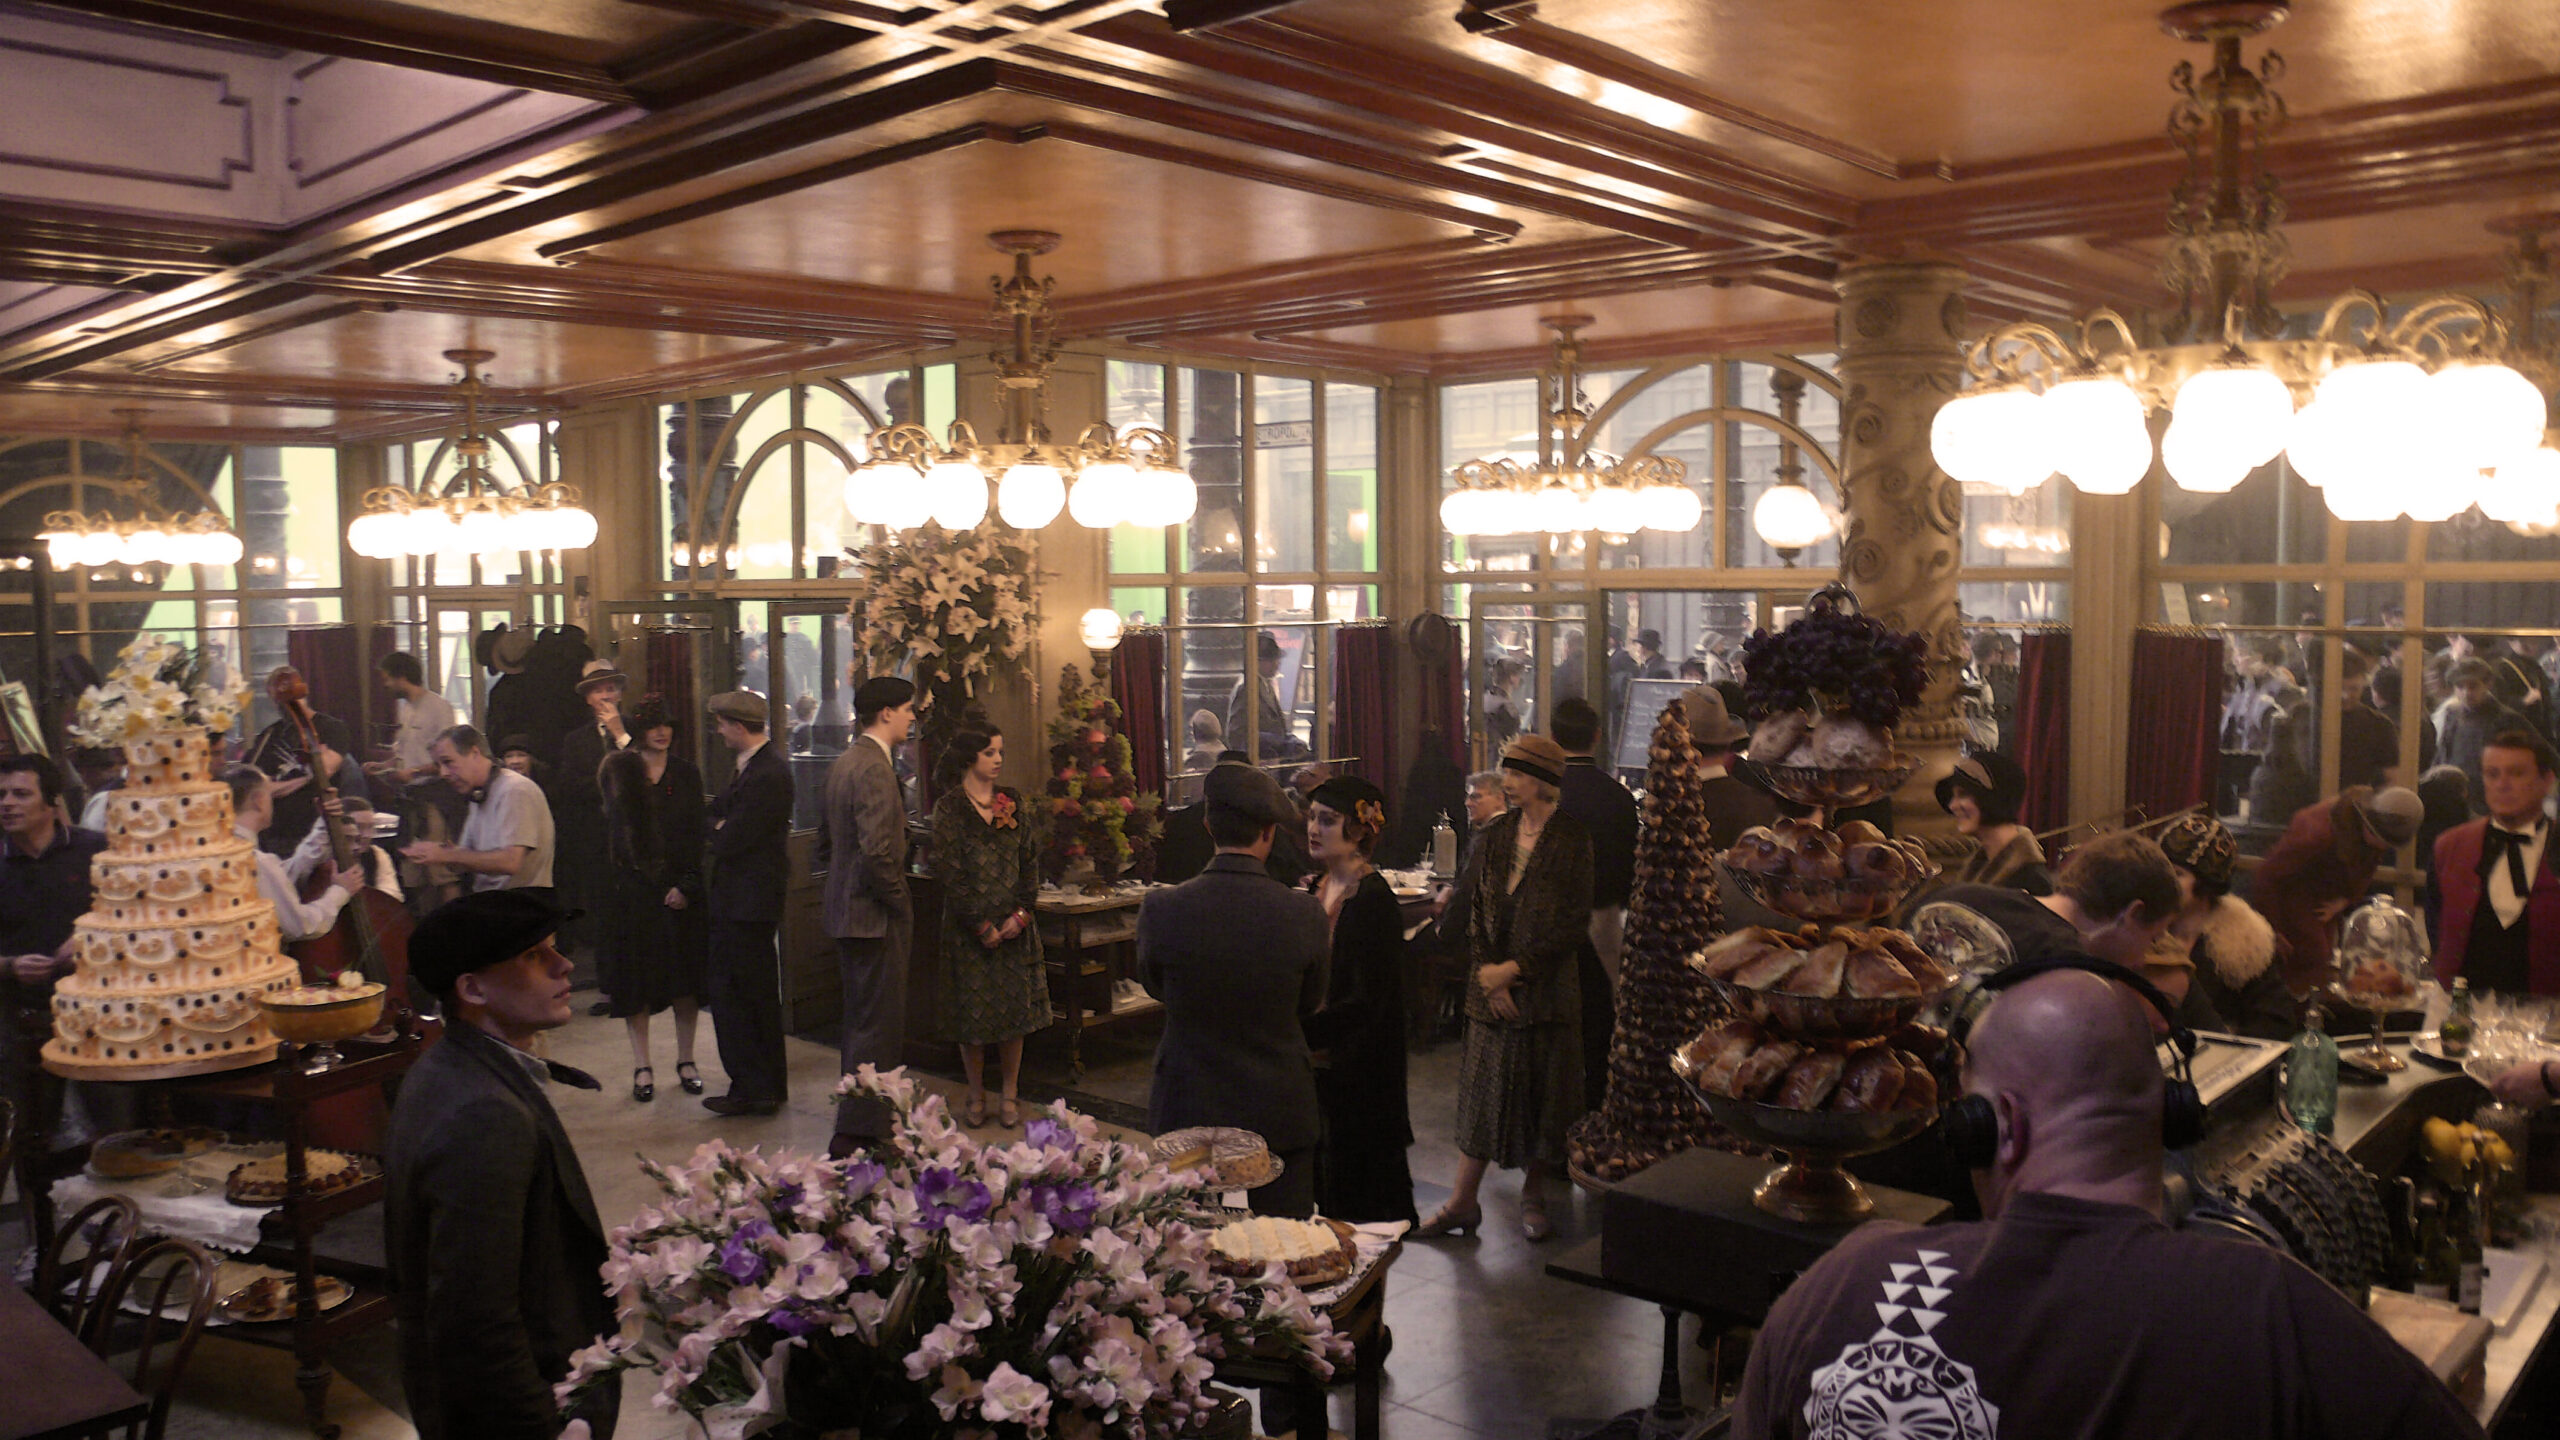 HUGO - Directed by Martin Scorsese - Int. Montparnasse Station, Café, Stage Set - ©2011 - Sony Pictures